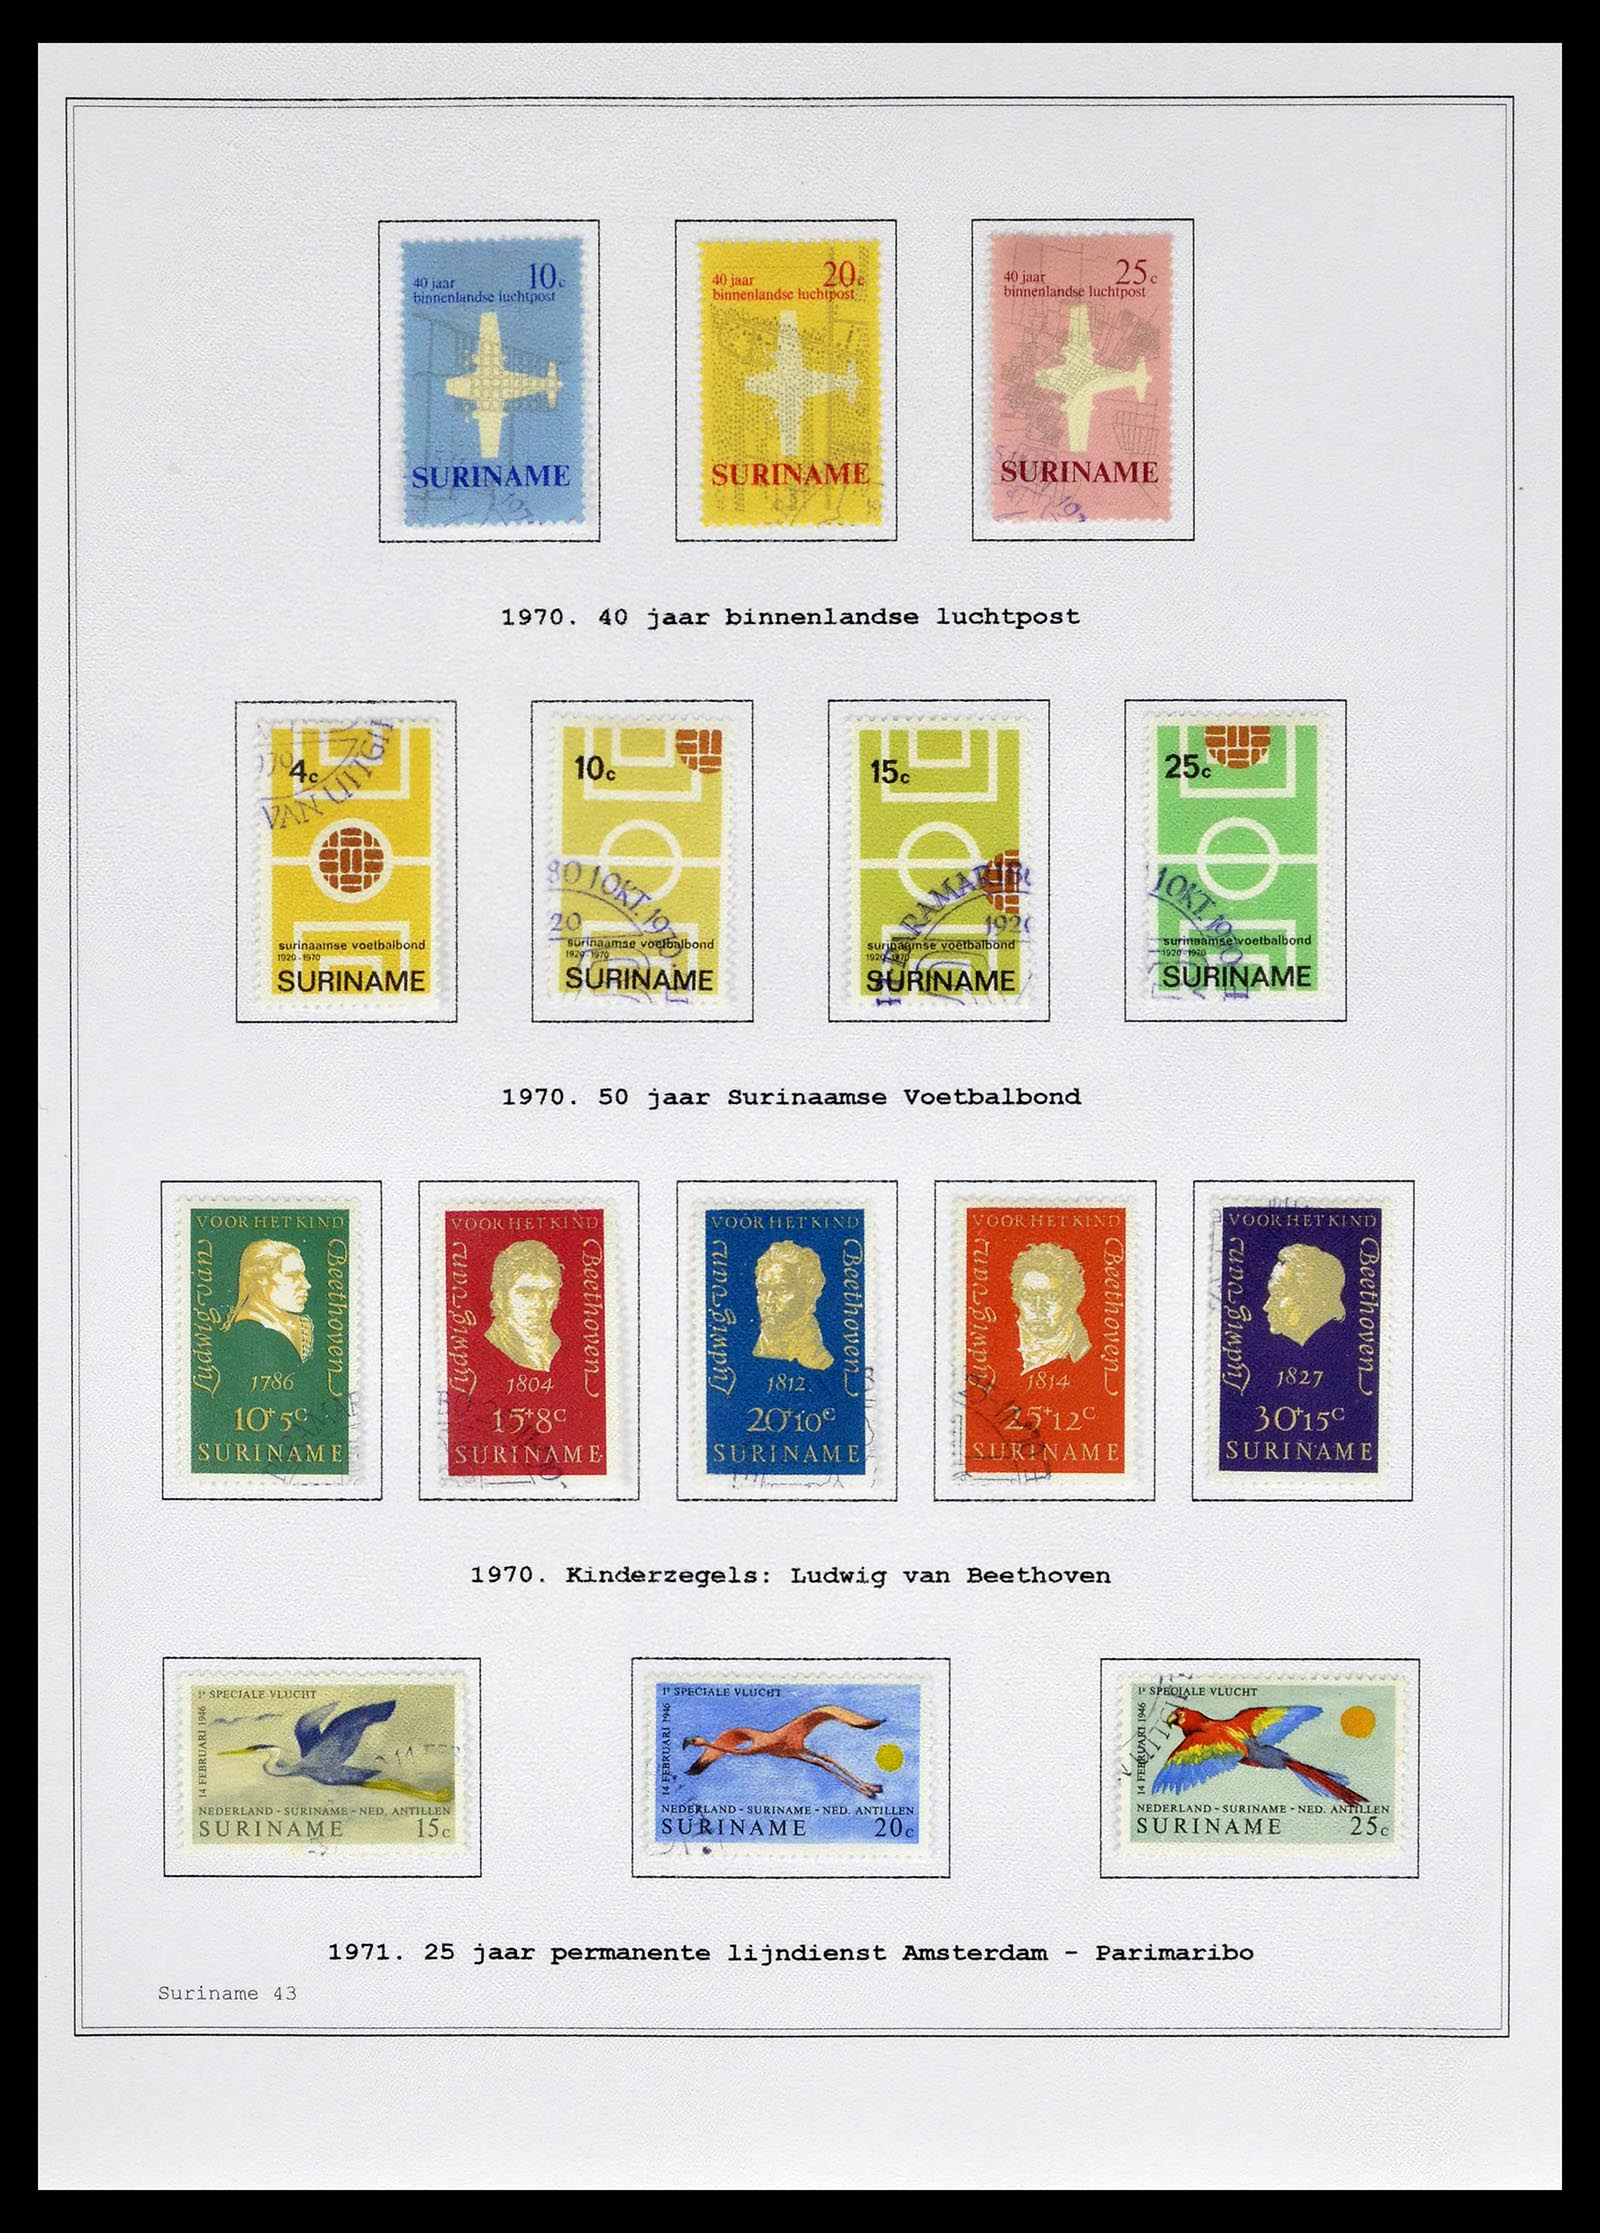 39026 0154 - Stamp collection 39026 Dutch east Indies and Suriname 1864-1975.